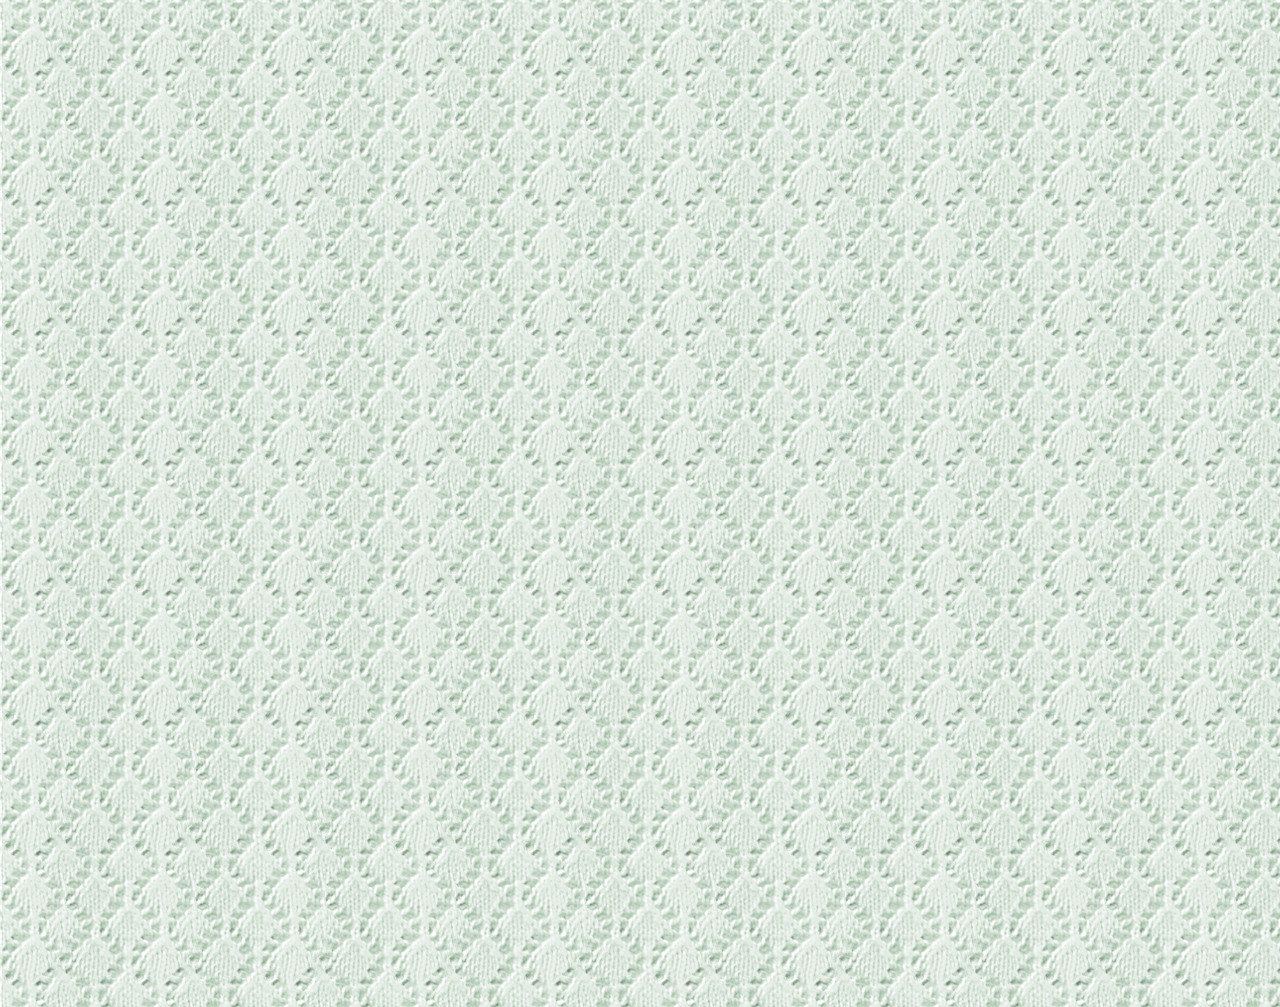 Knit 2 Green Backgrounds